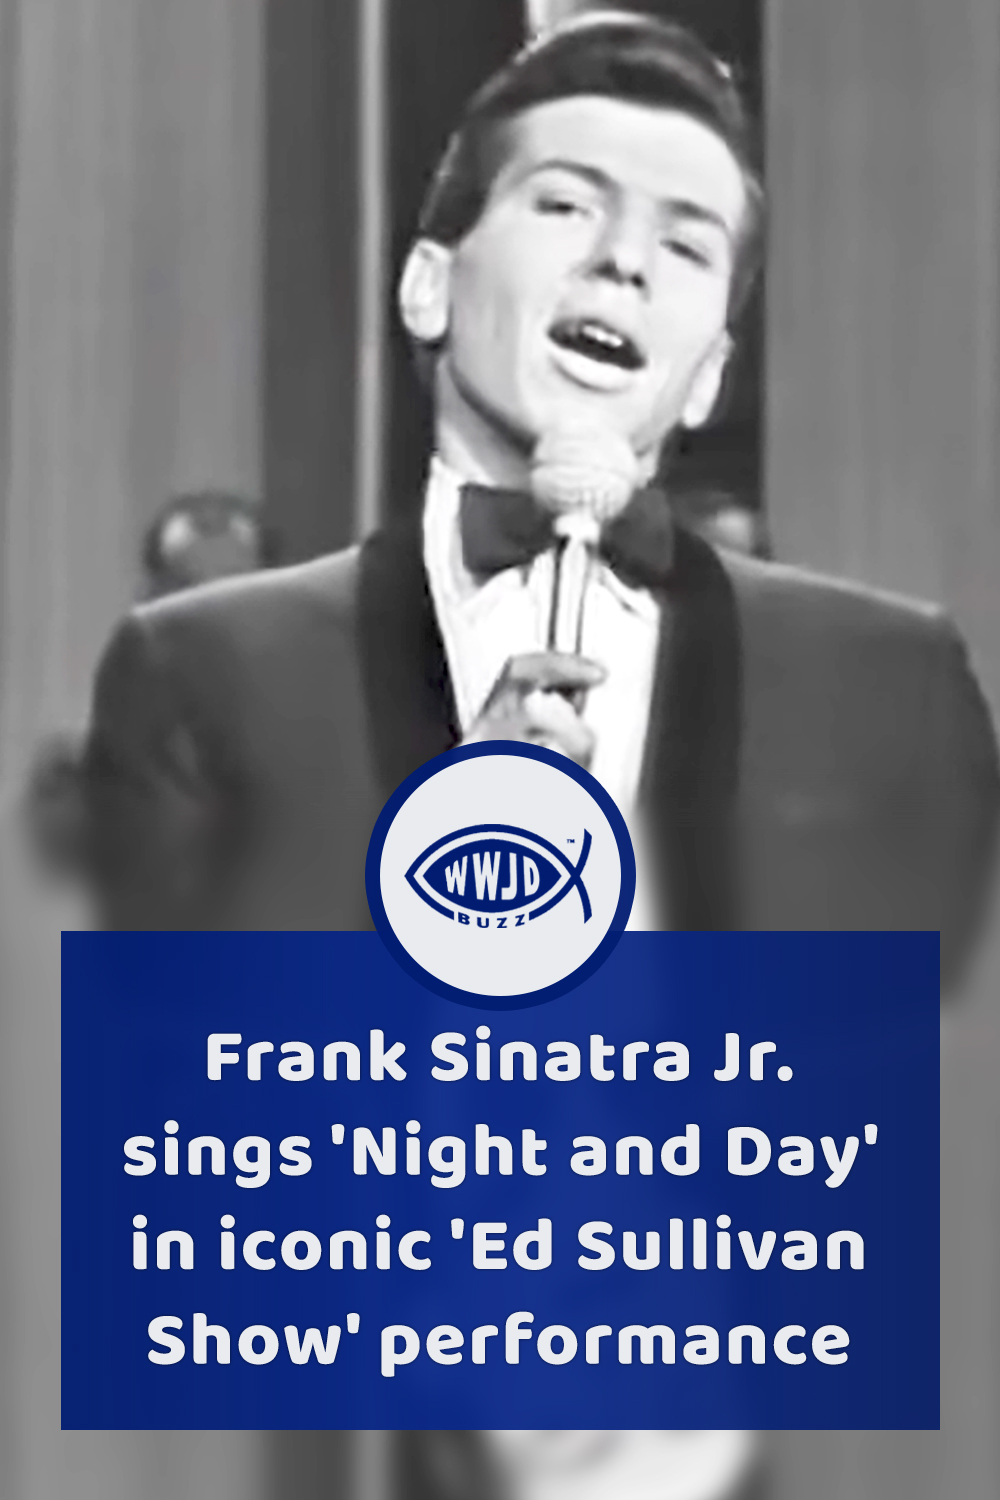 Frank Sinatra Jr. sings \'Night and Day\' in iconic \'Ed Sullivan Show\' performance